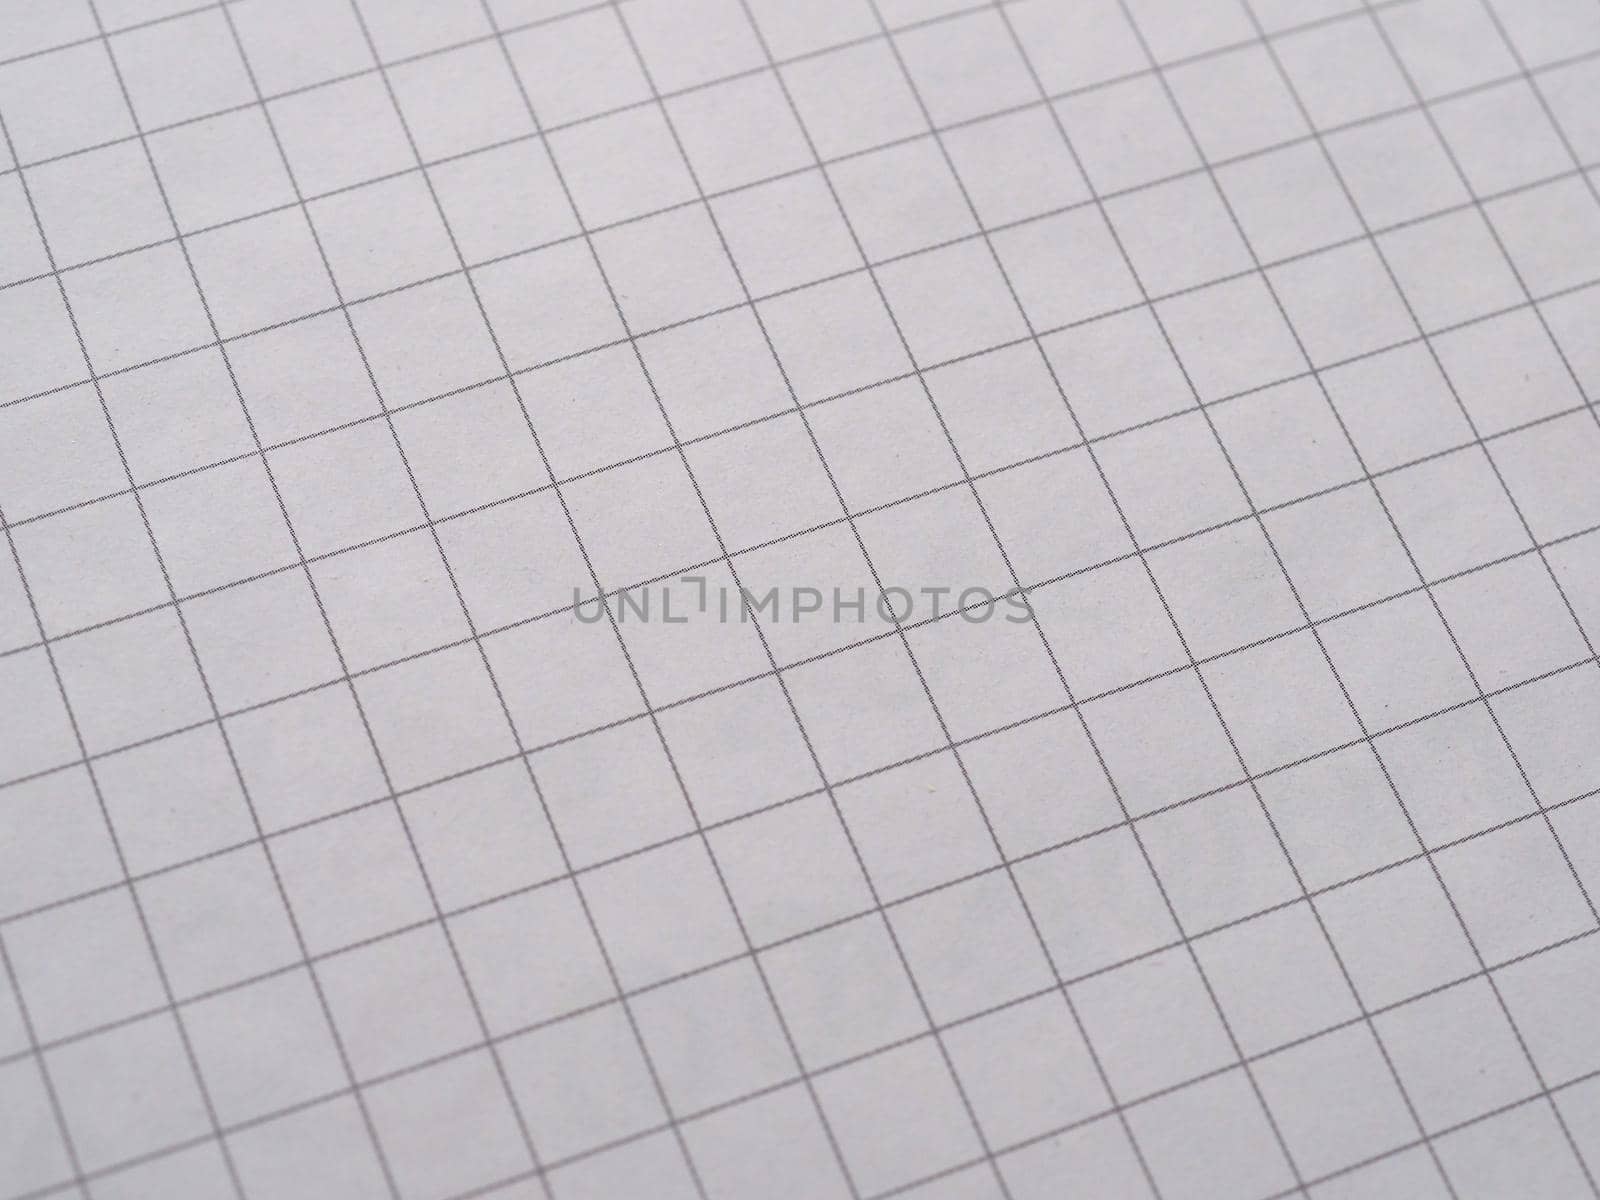 white graph paper texture useful as a background